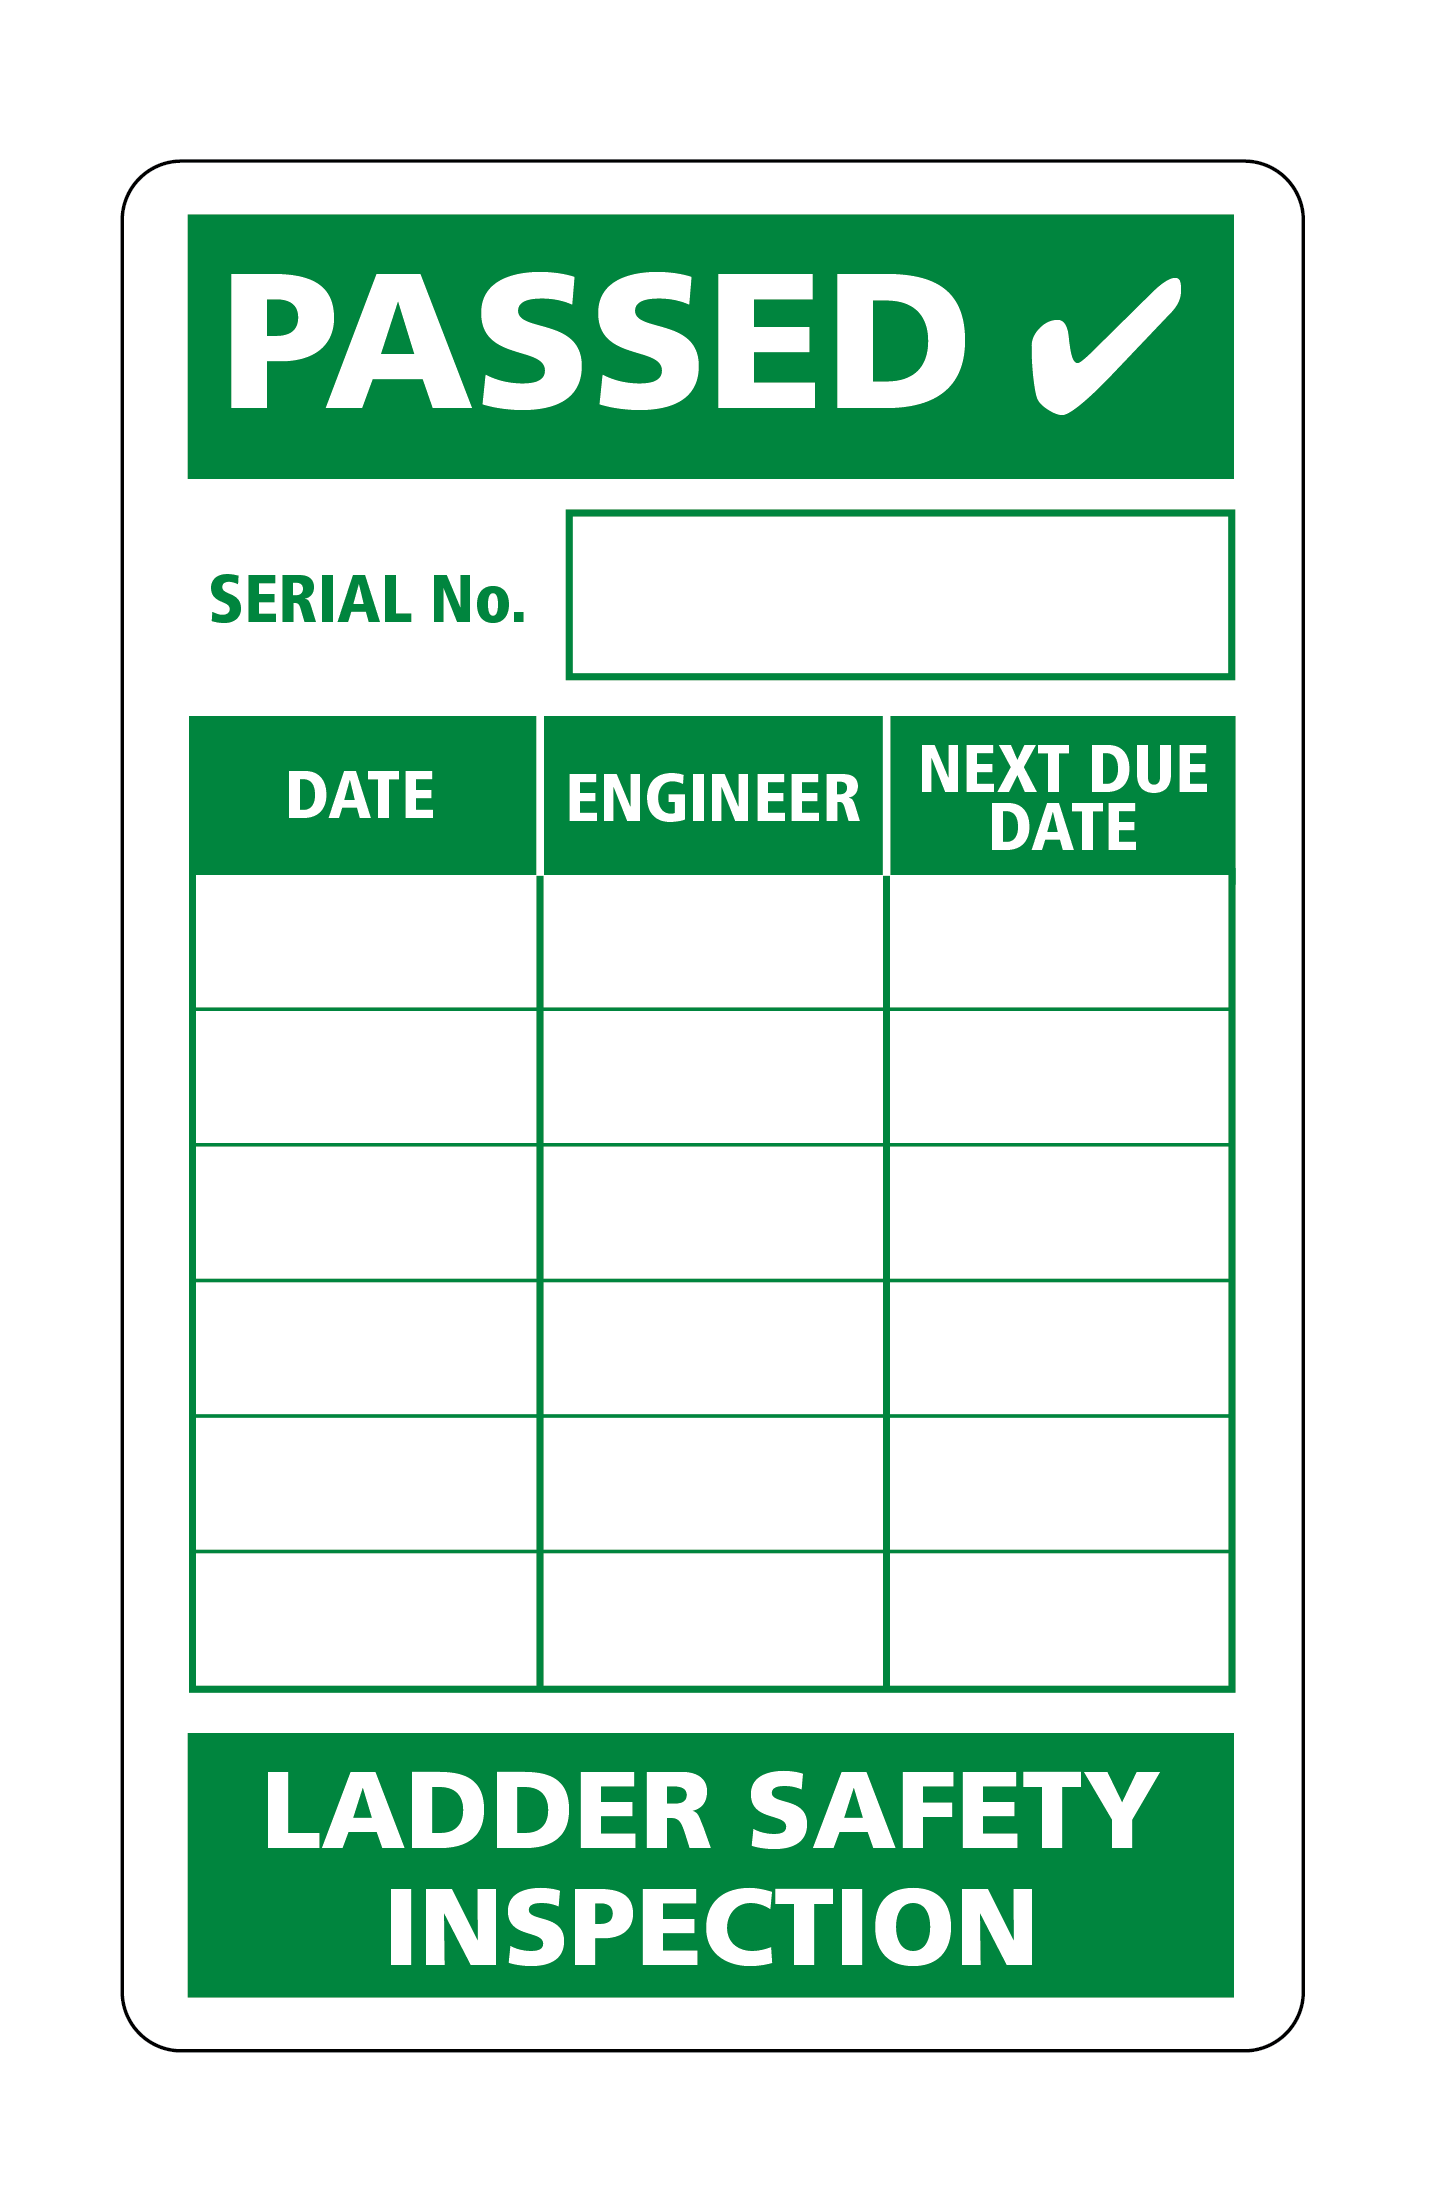 Ladder Safety Inspection Self Adhesive Vinyl Stickers Health & Safety Business 